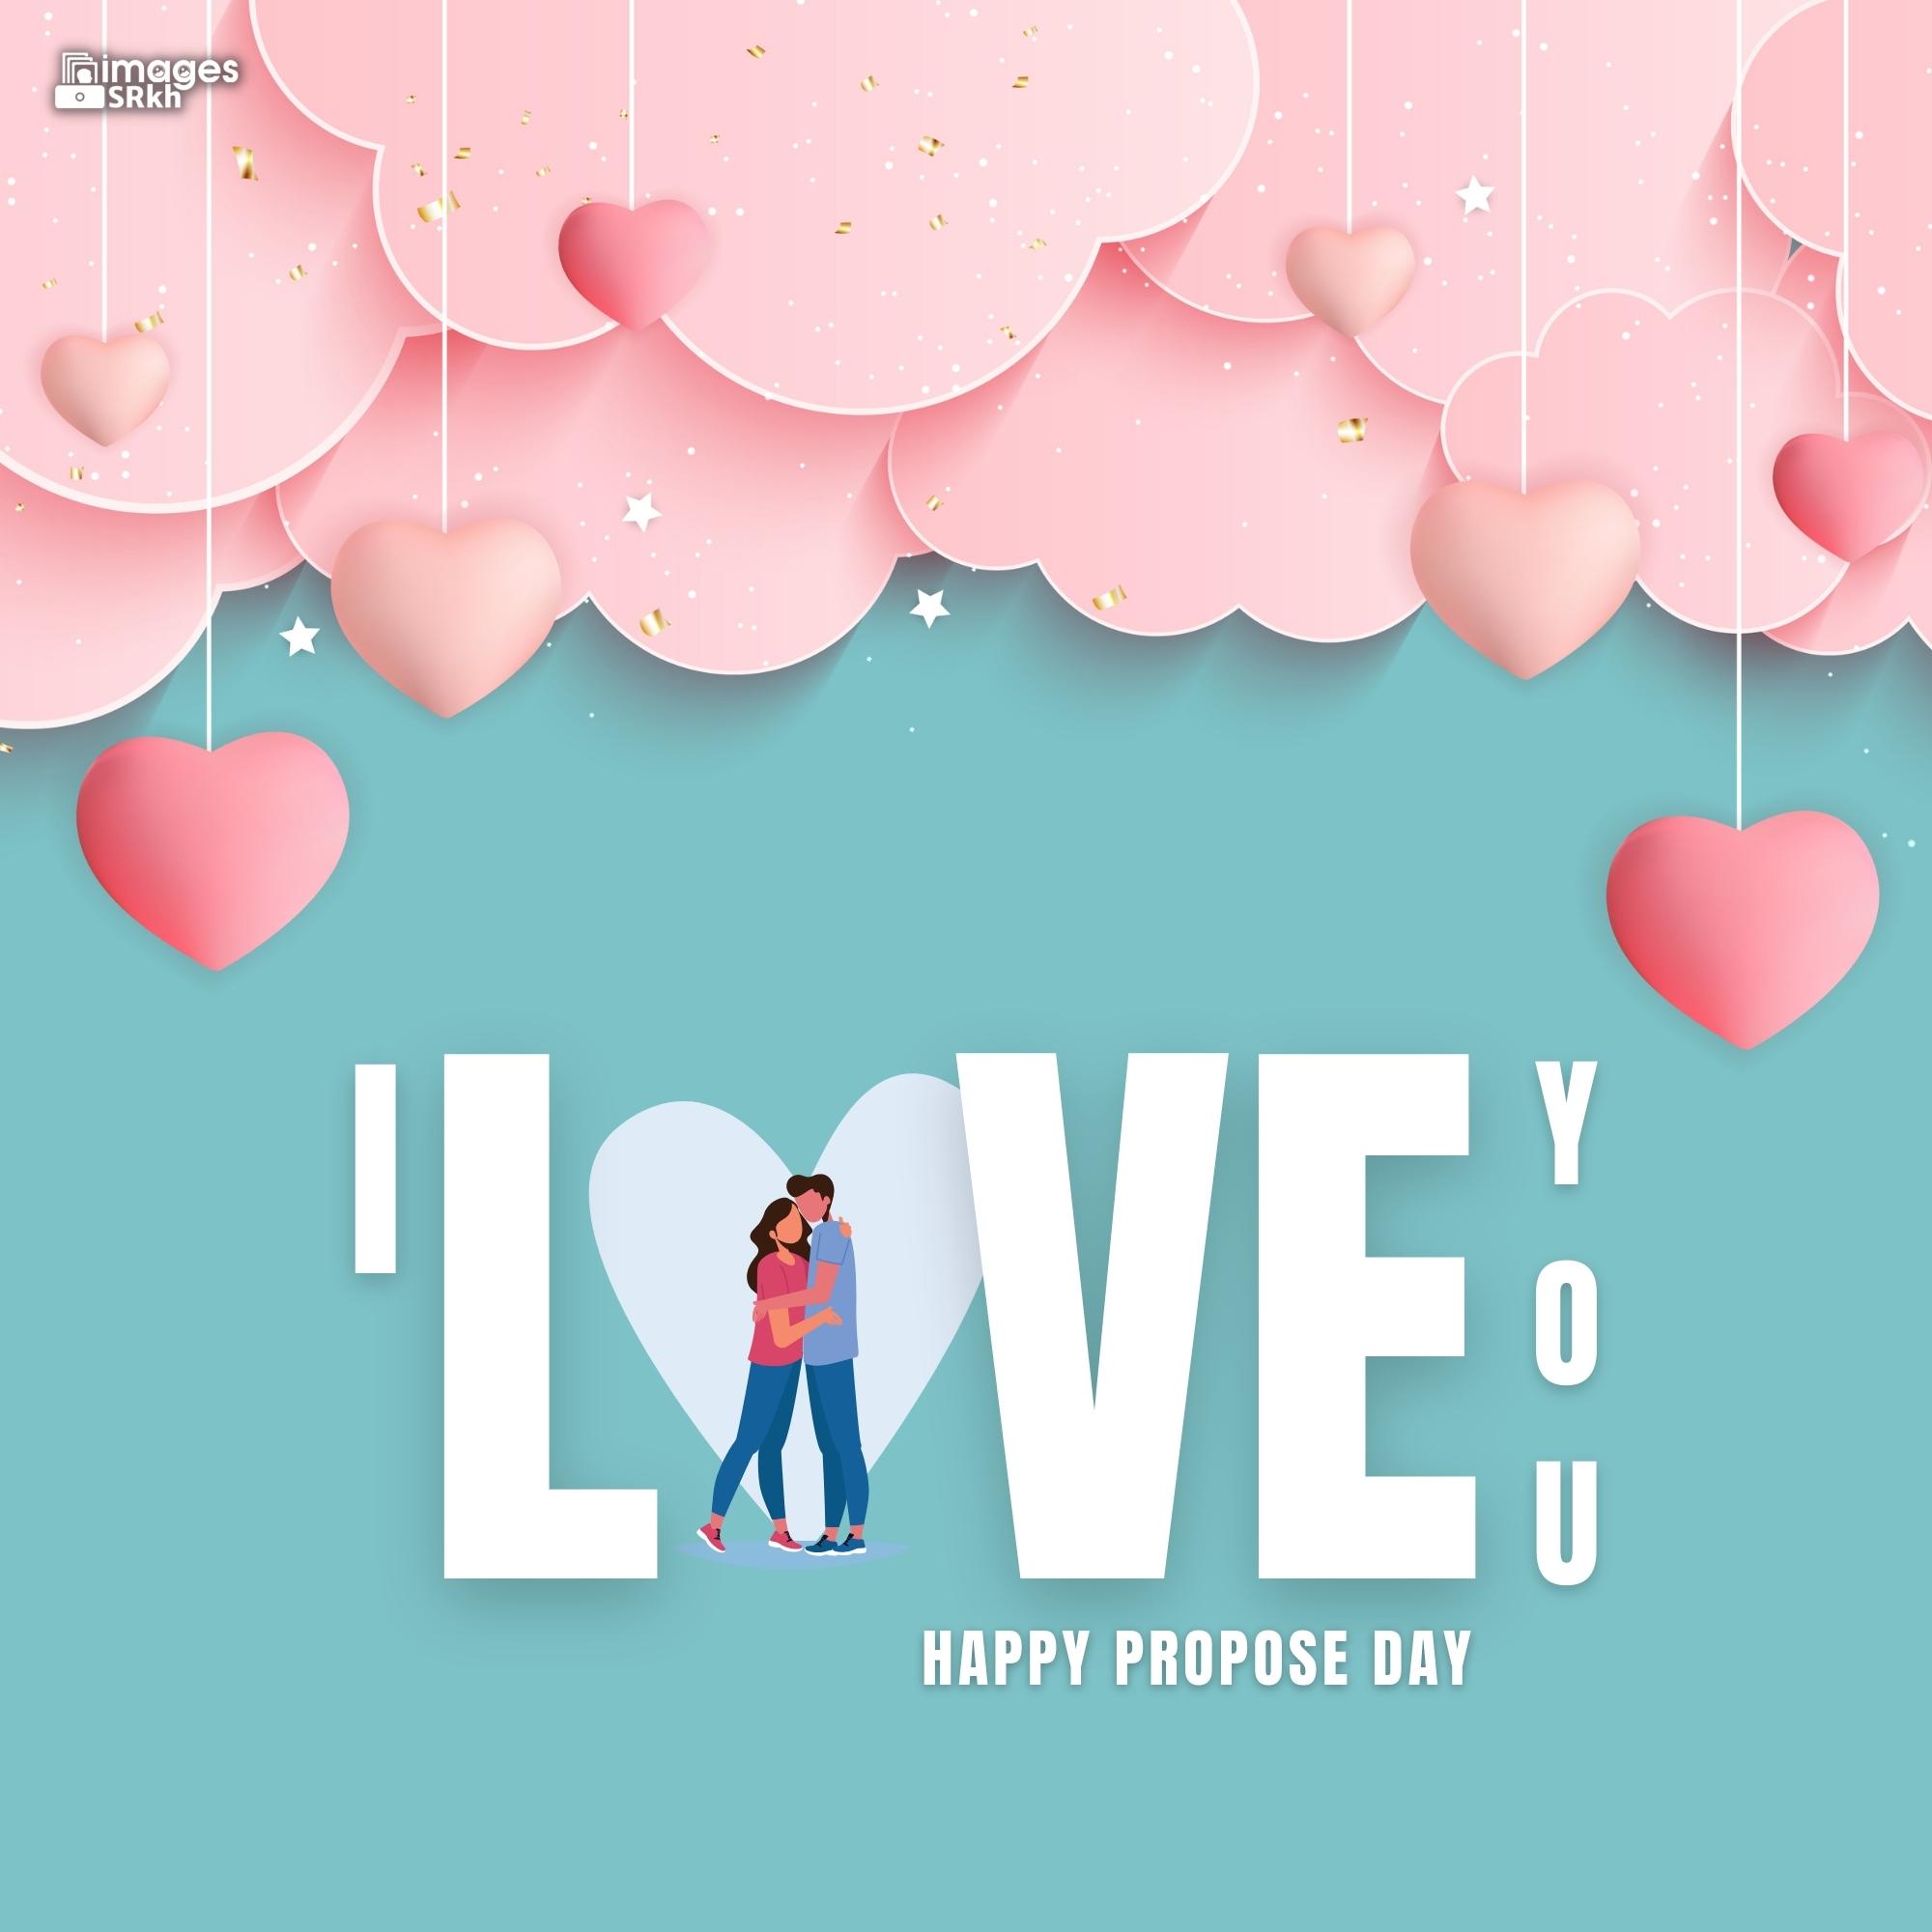 Happy Propose Day Images | 415 | I LOVE YOU